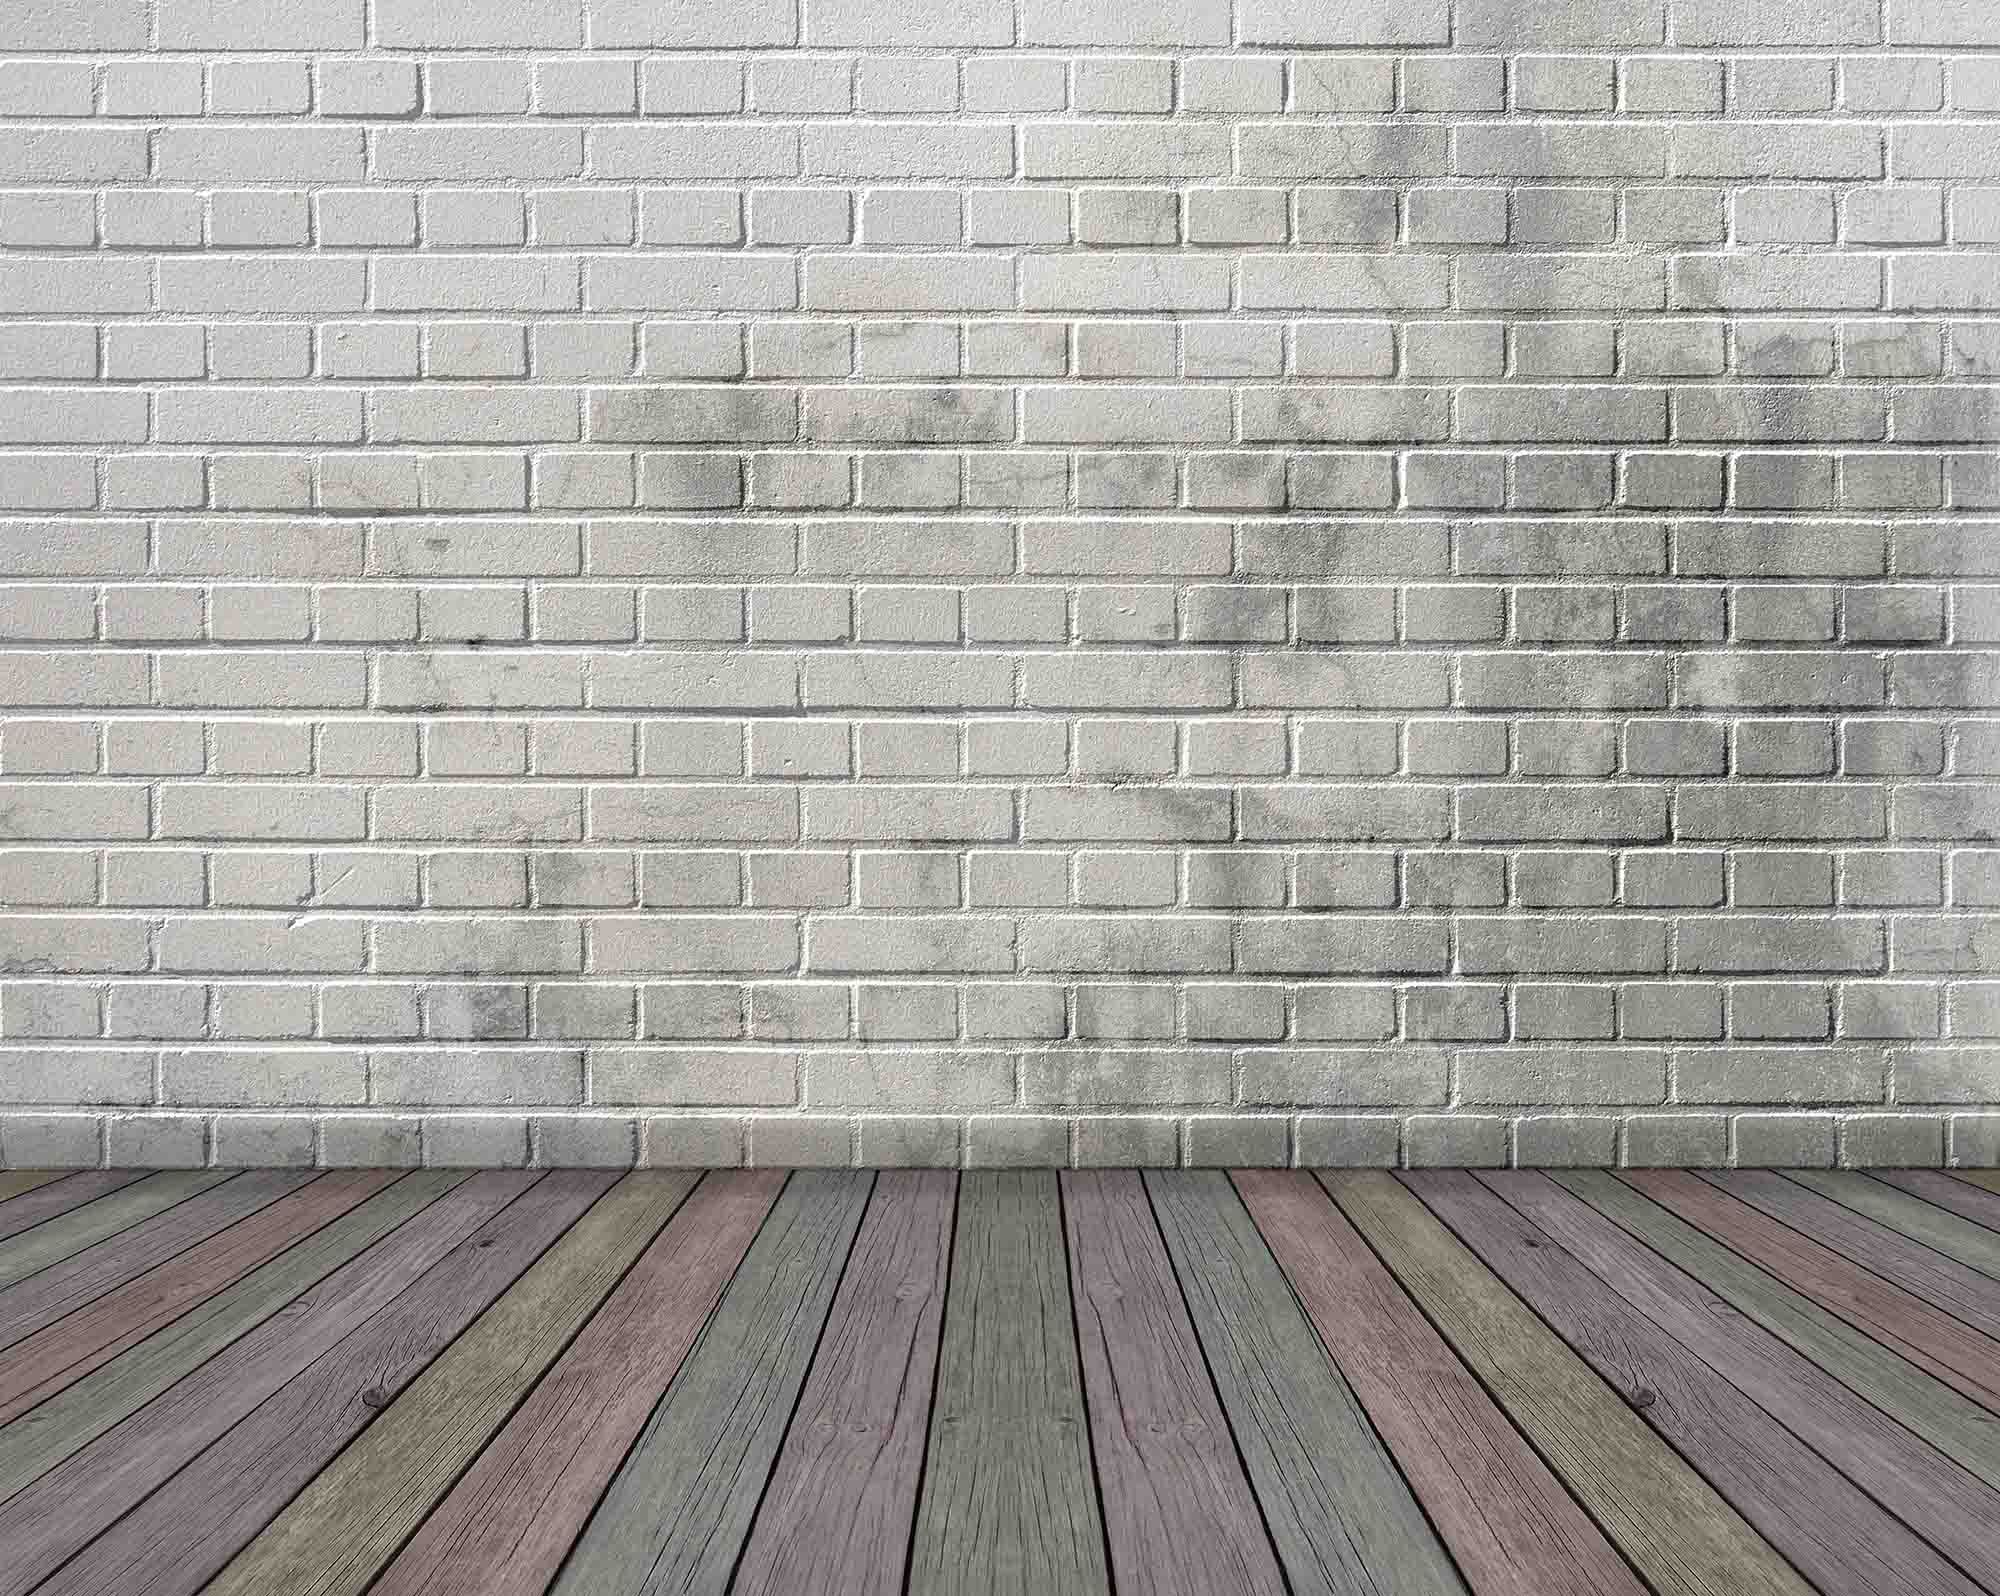 White Brick Wall Texture With Colorful Wood Floor Backdrop For Photography Shopbackdrop